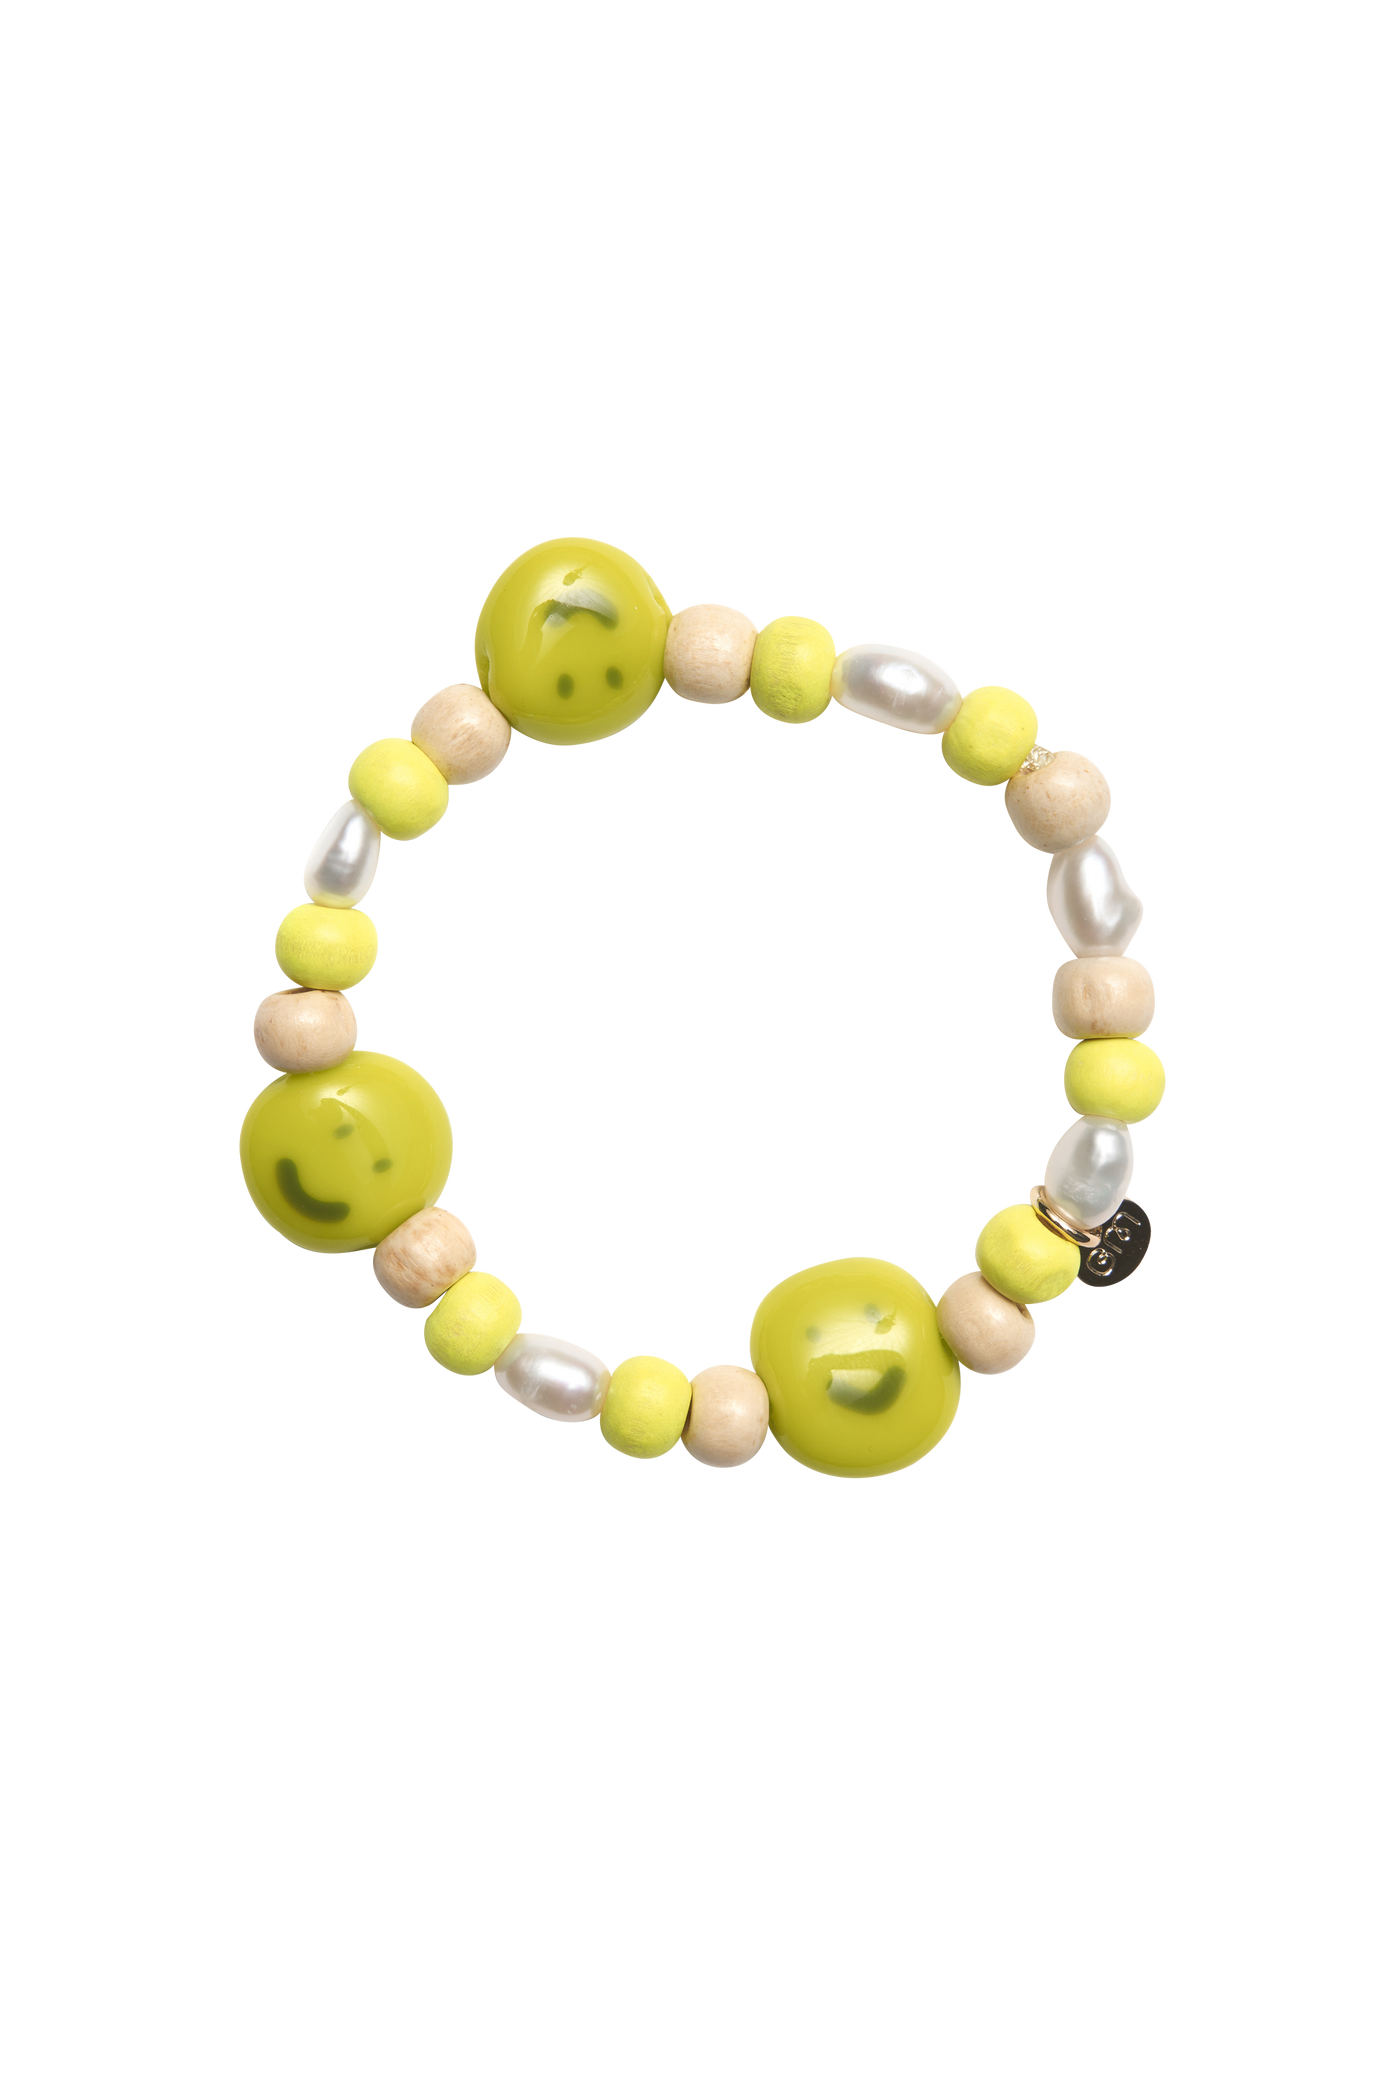 Bianca Mavrick x Lawn Bowls Collaboration Smiley Bracelet Glass  and Pearl Jewellery